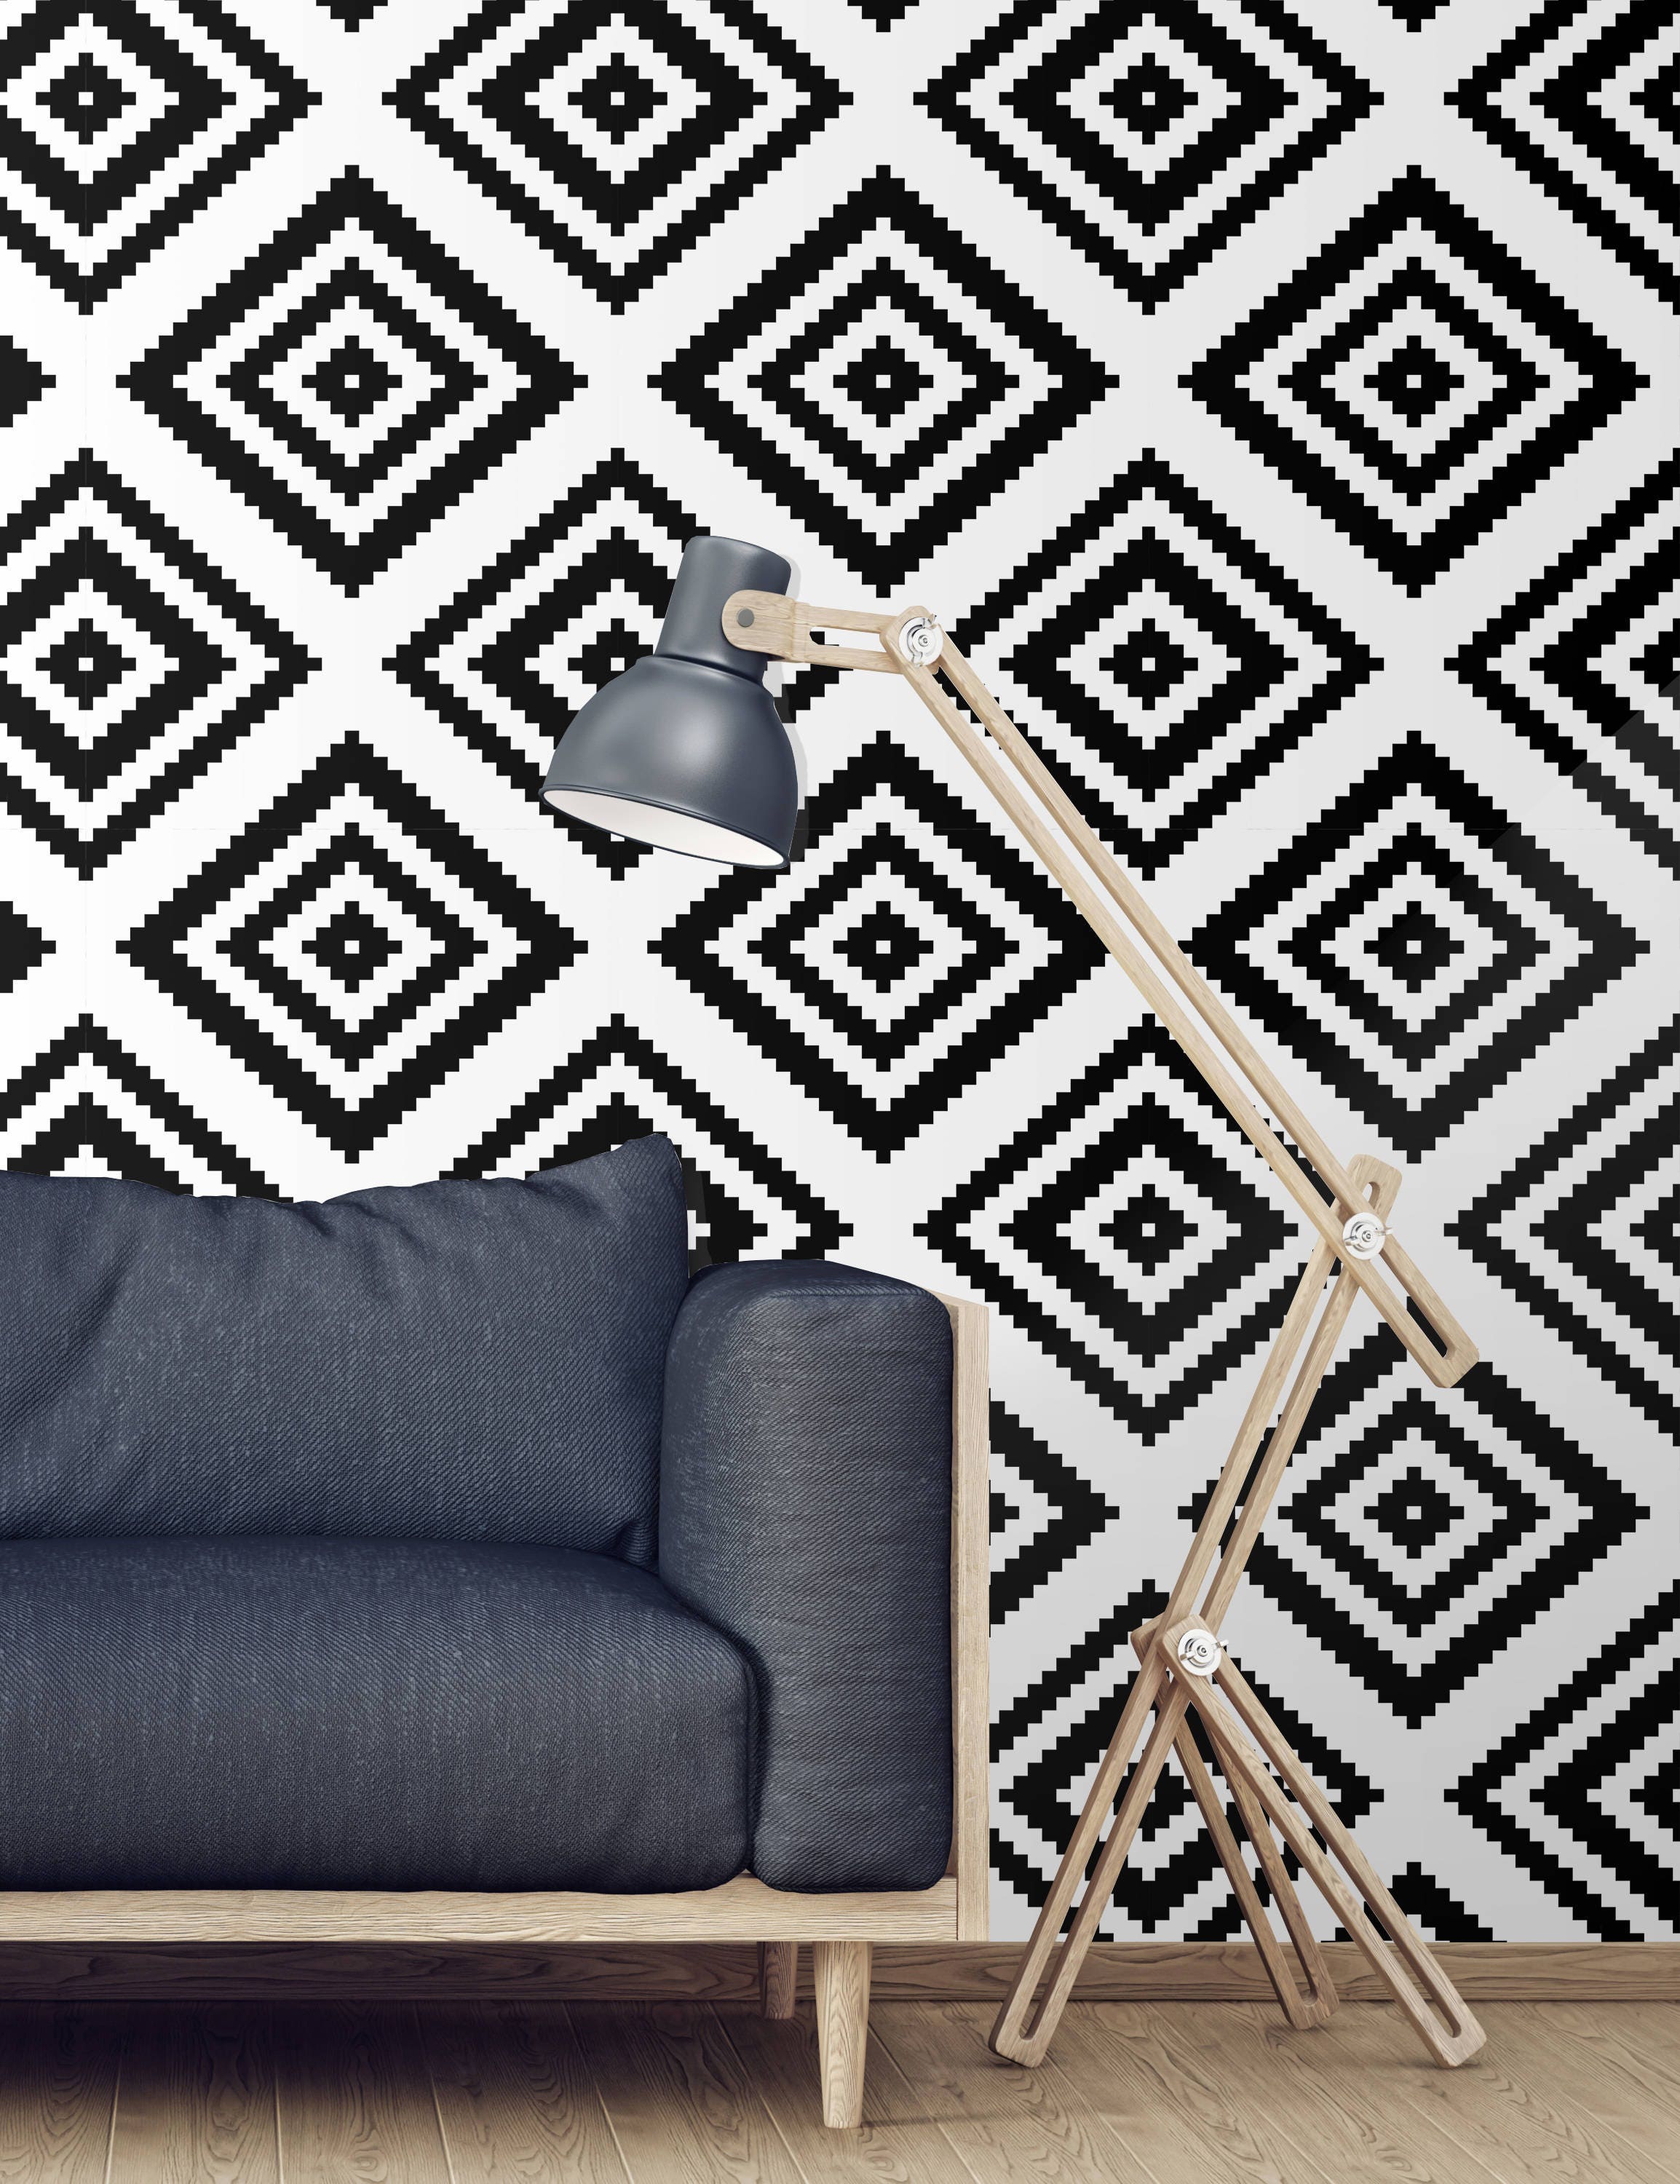 Self Adhesive Geometric Wallpaper Black and White Removable | Etsy